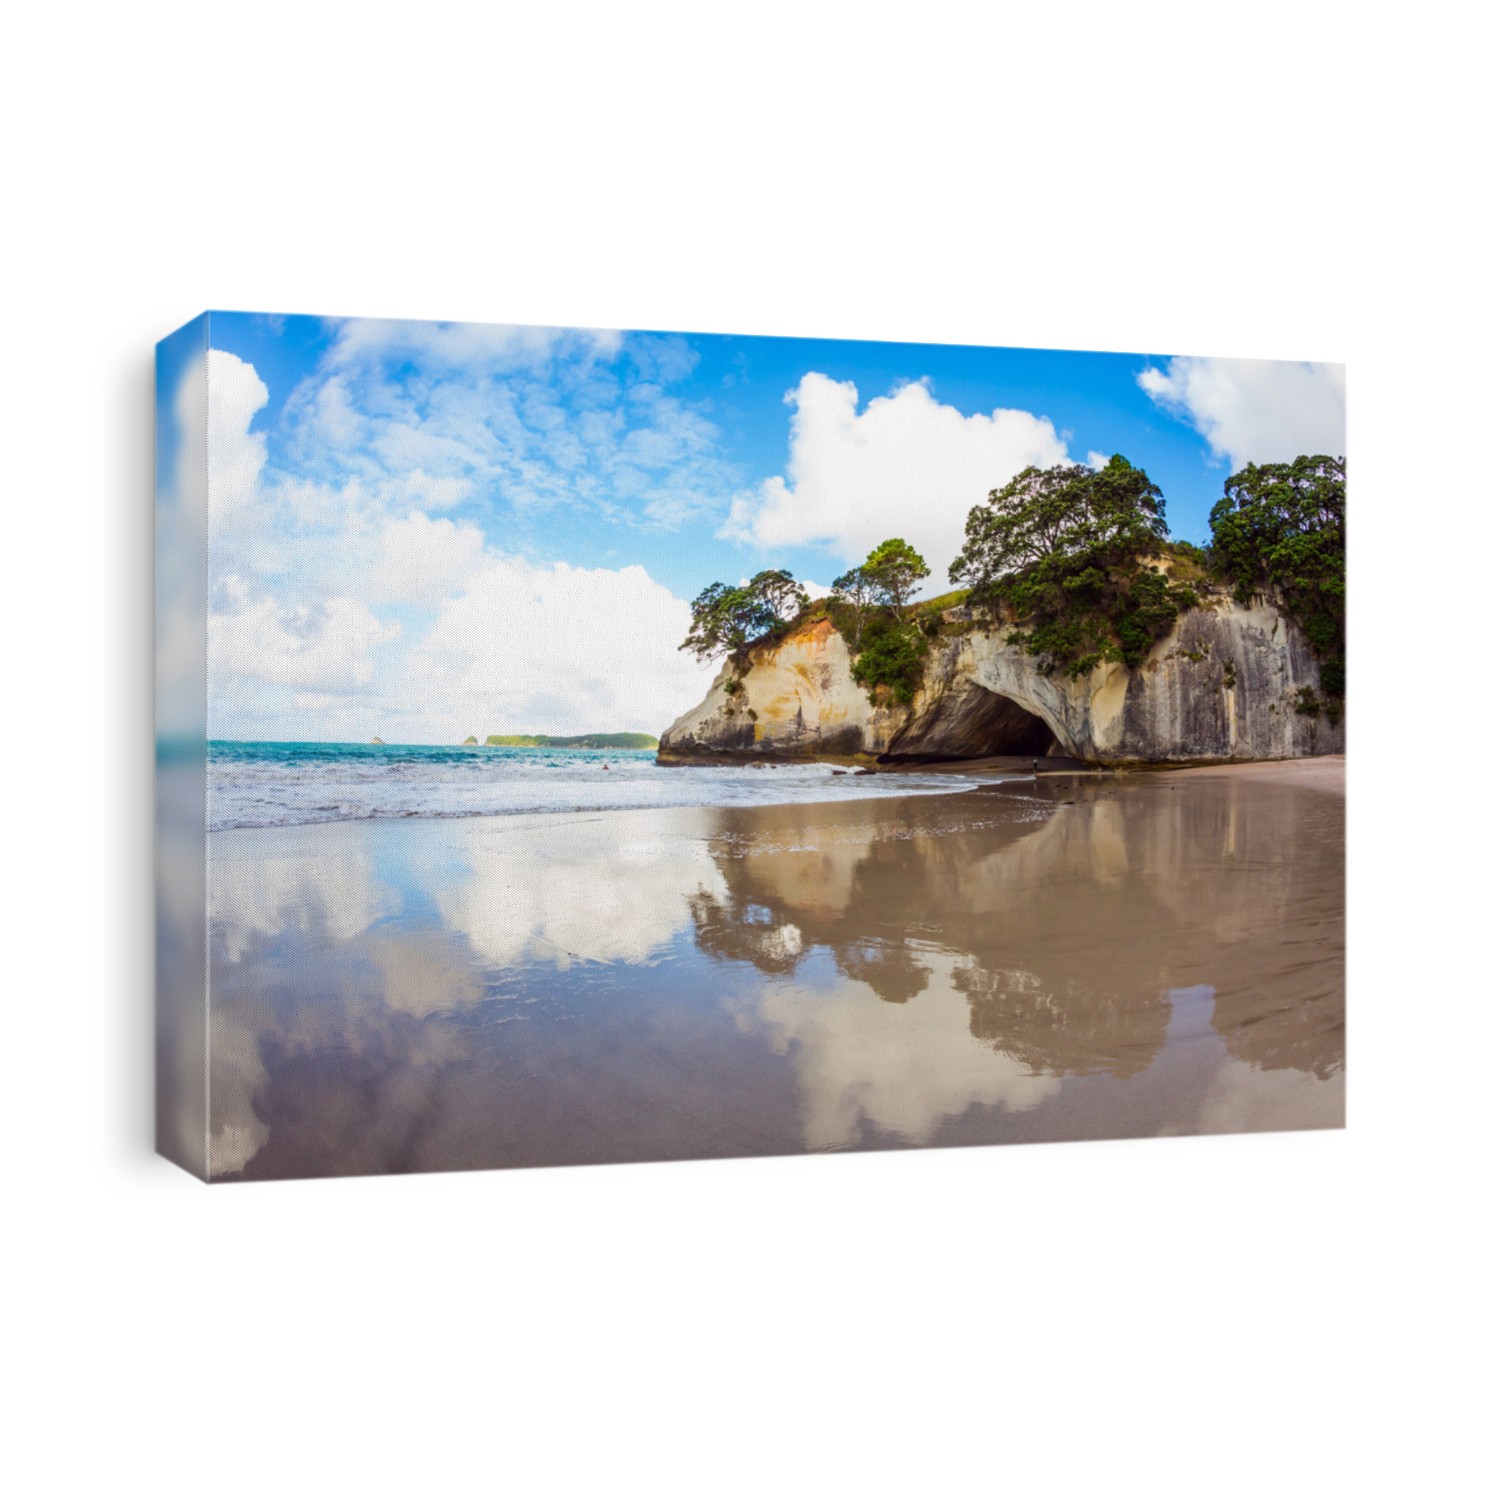 Cathedral Cove on the North Island of New Zealand. Grass and trees grow on picturesque huge rocks. Mirror reflections of clouds in wet sand. The concept of exotic, ecological and photo tourism